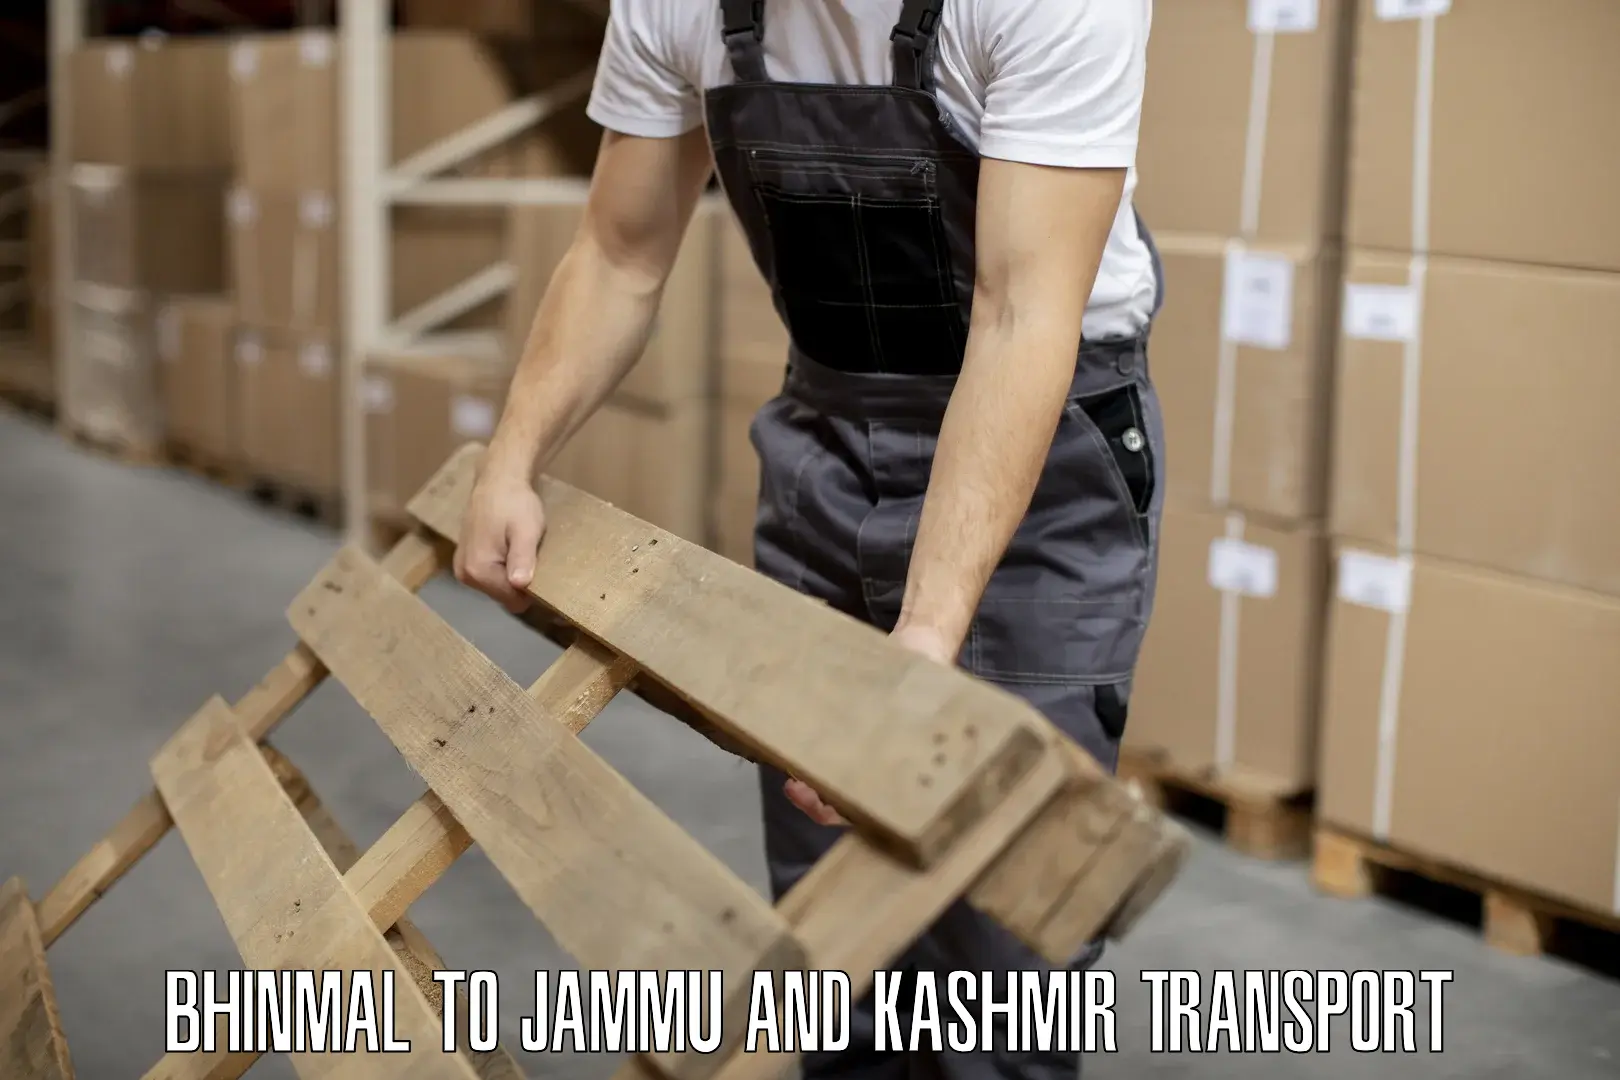 Road transport online services Bhinmal to Budgam